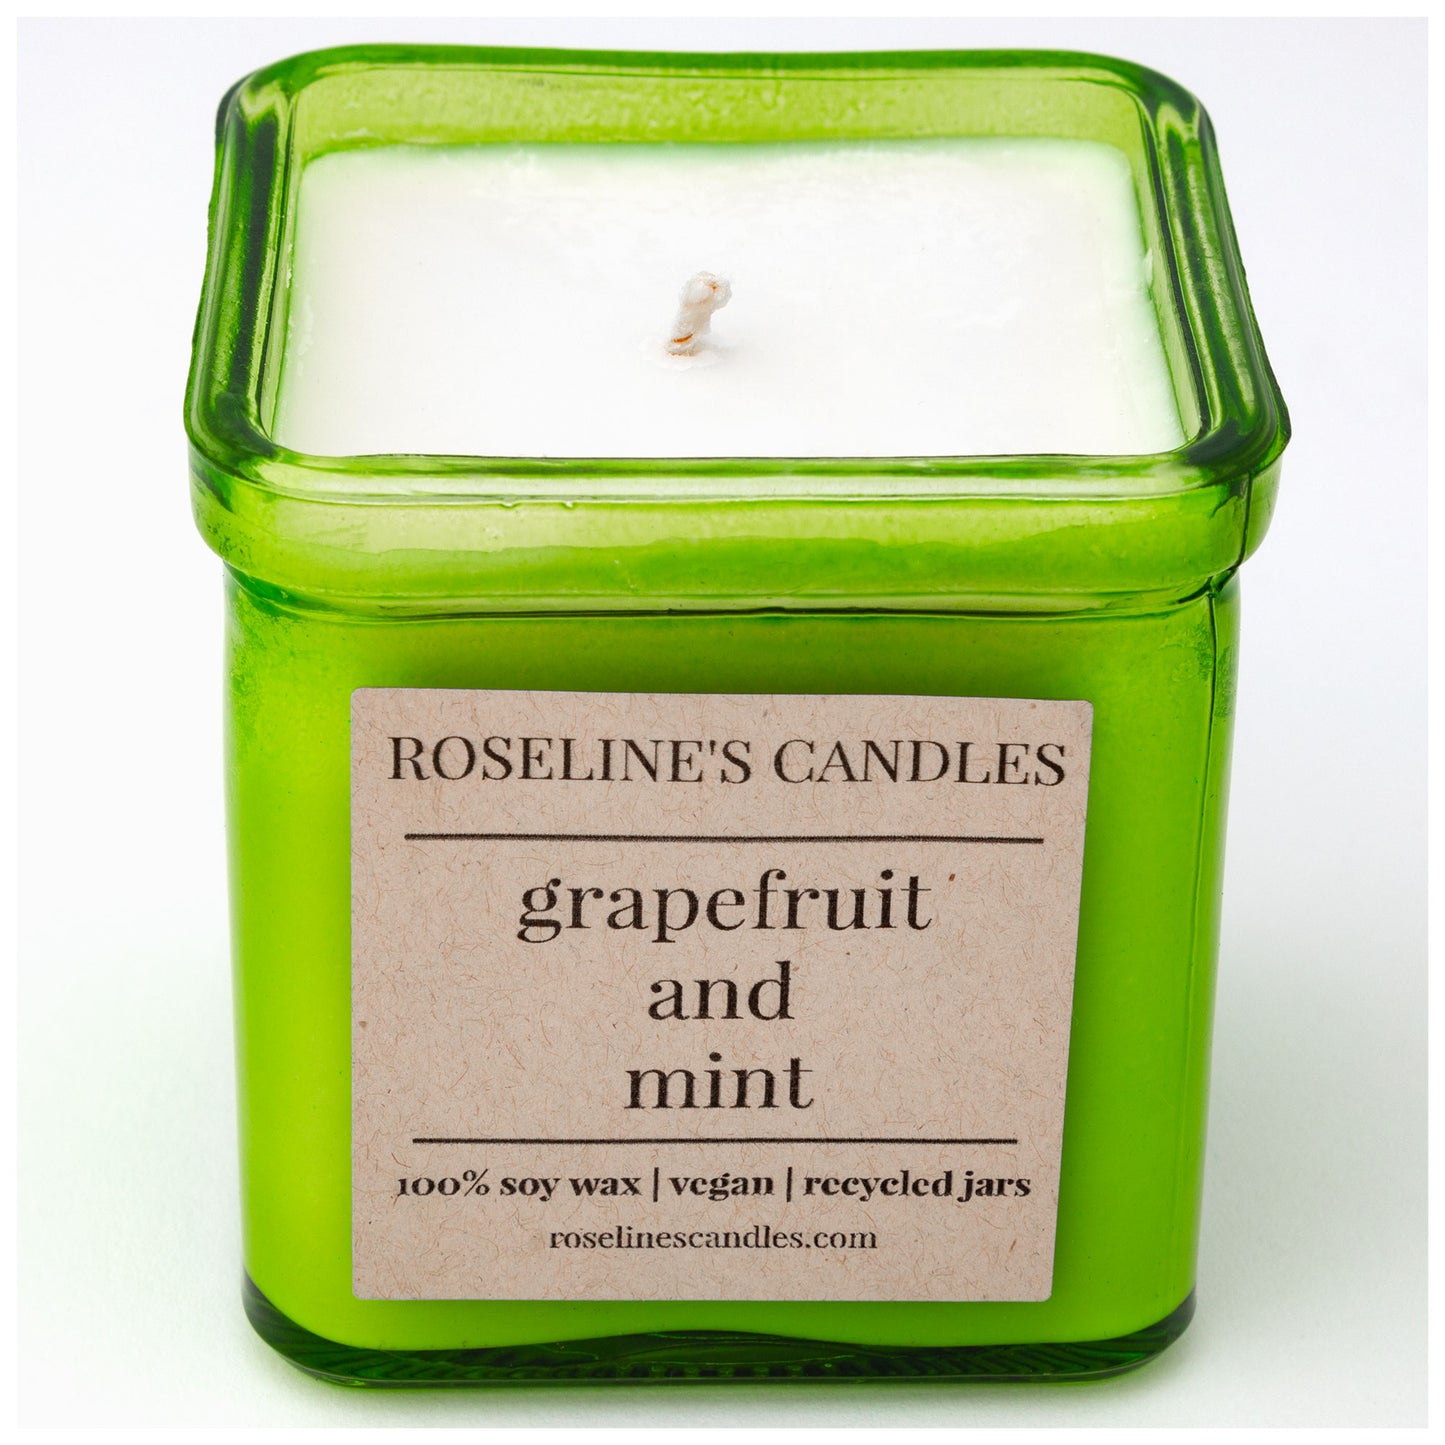 Roseline's Handmade Candle in Recycled Glass